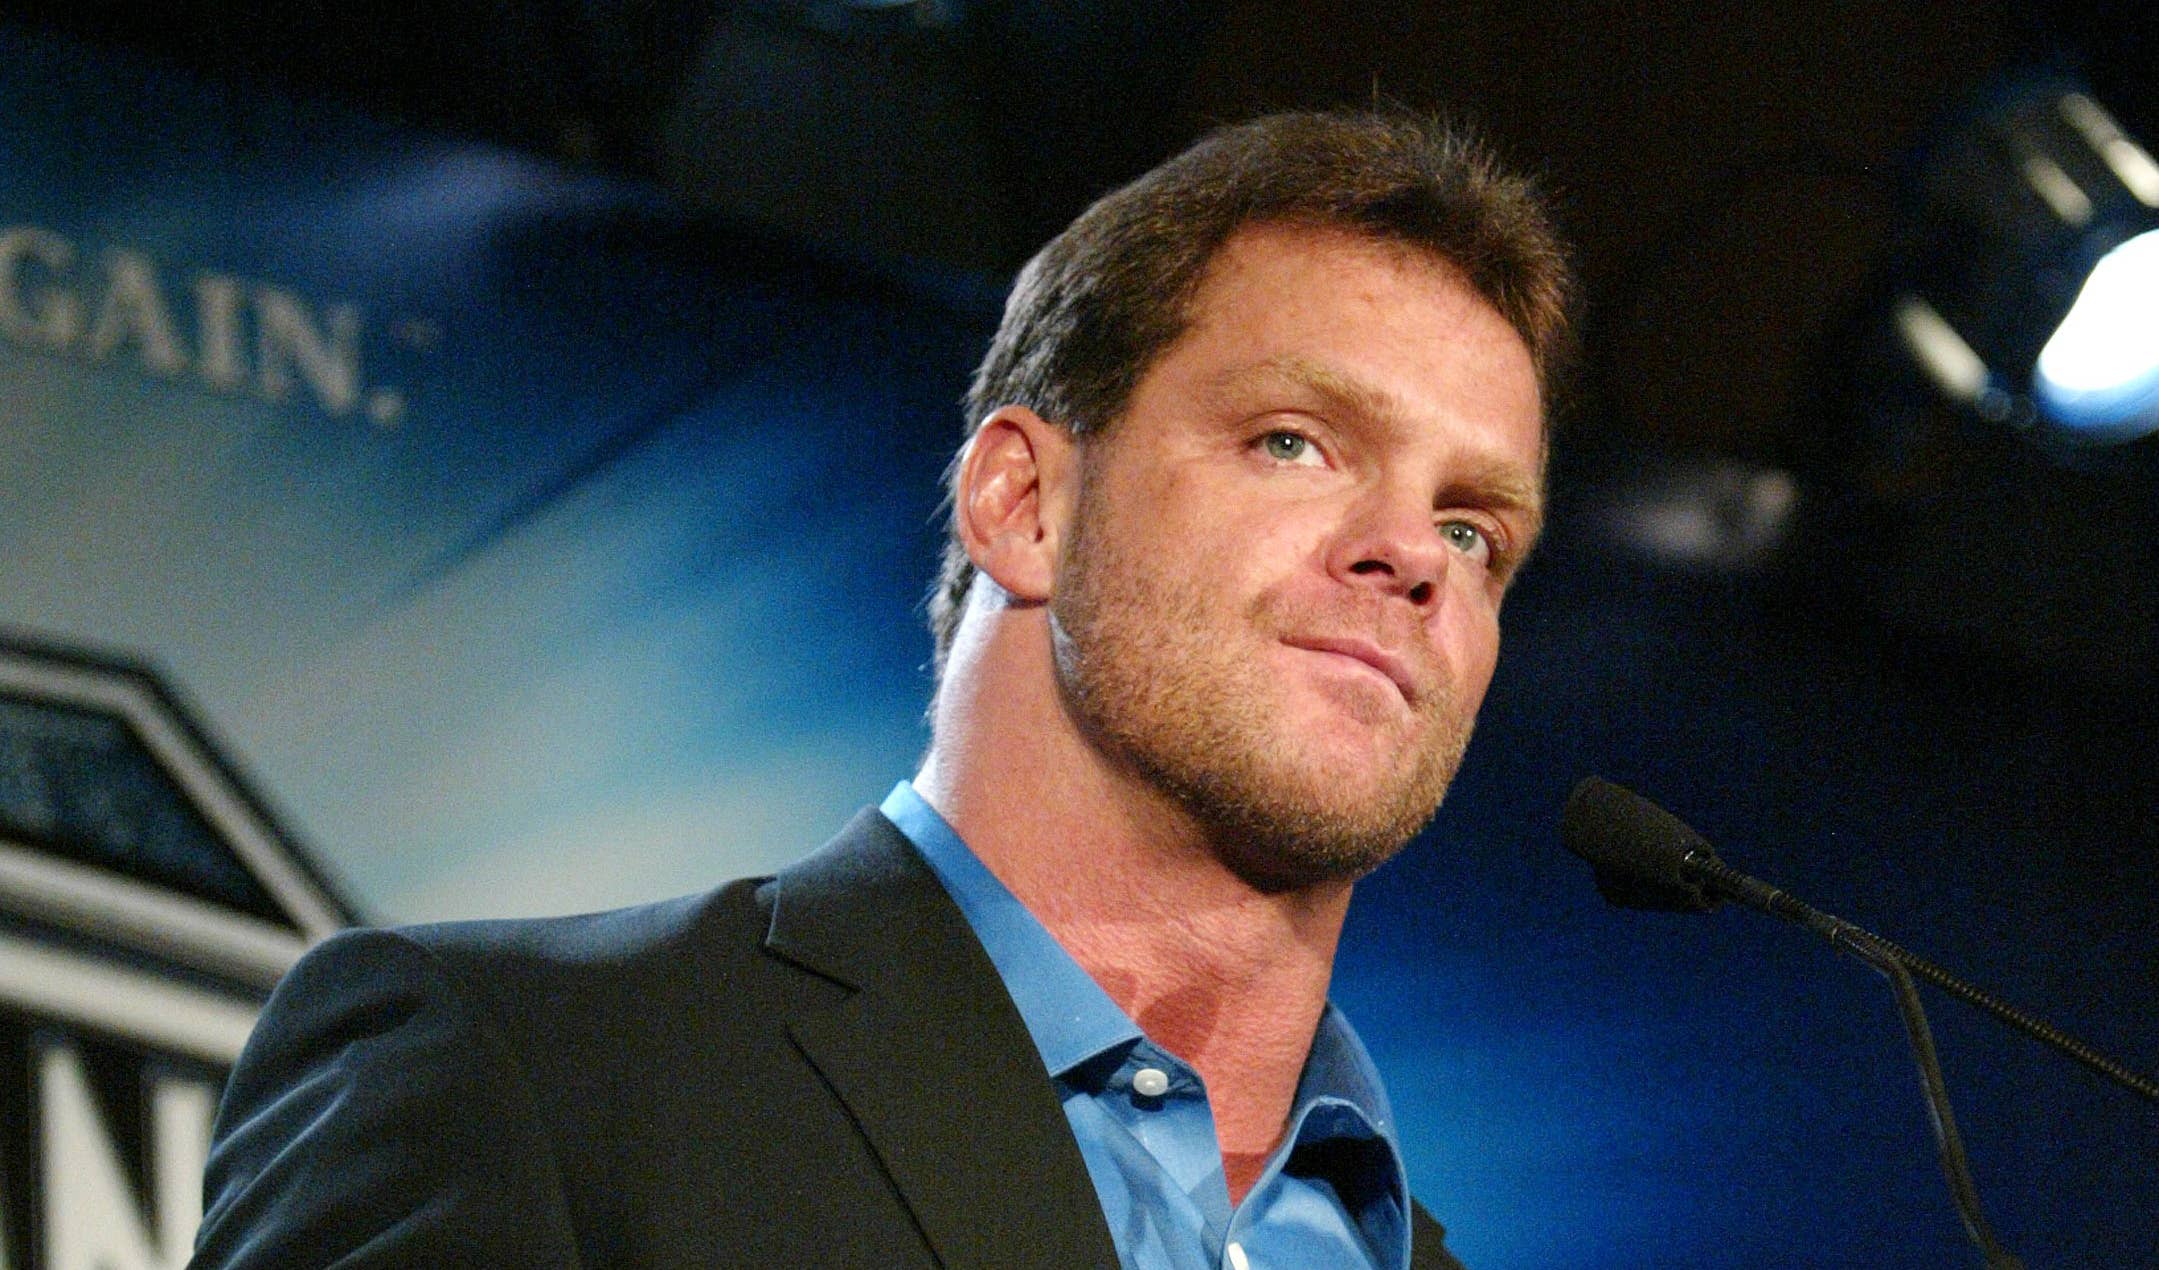 Chris Benoit attends a press conference to promote Wrestlemania XX